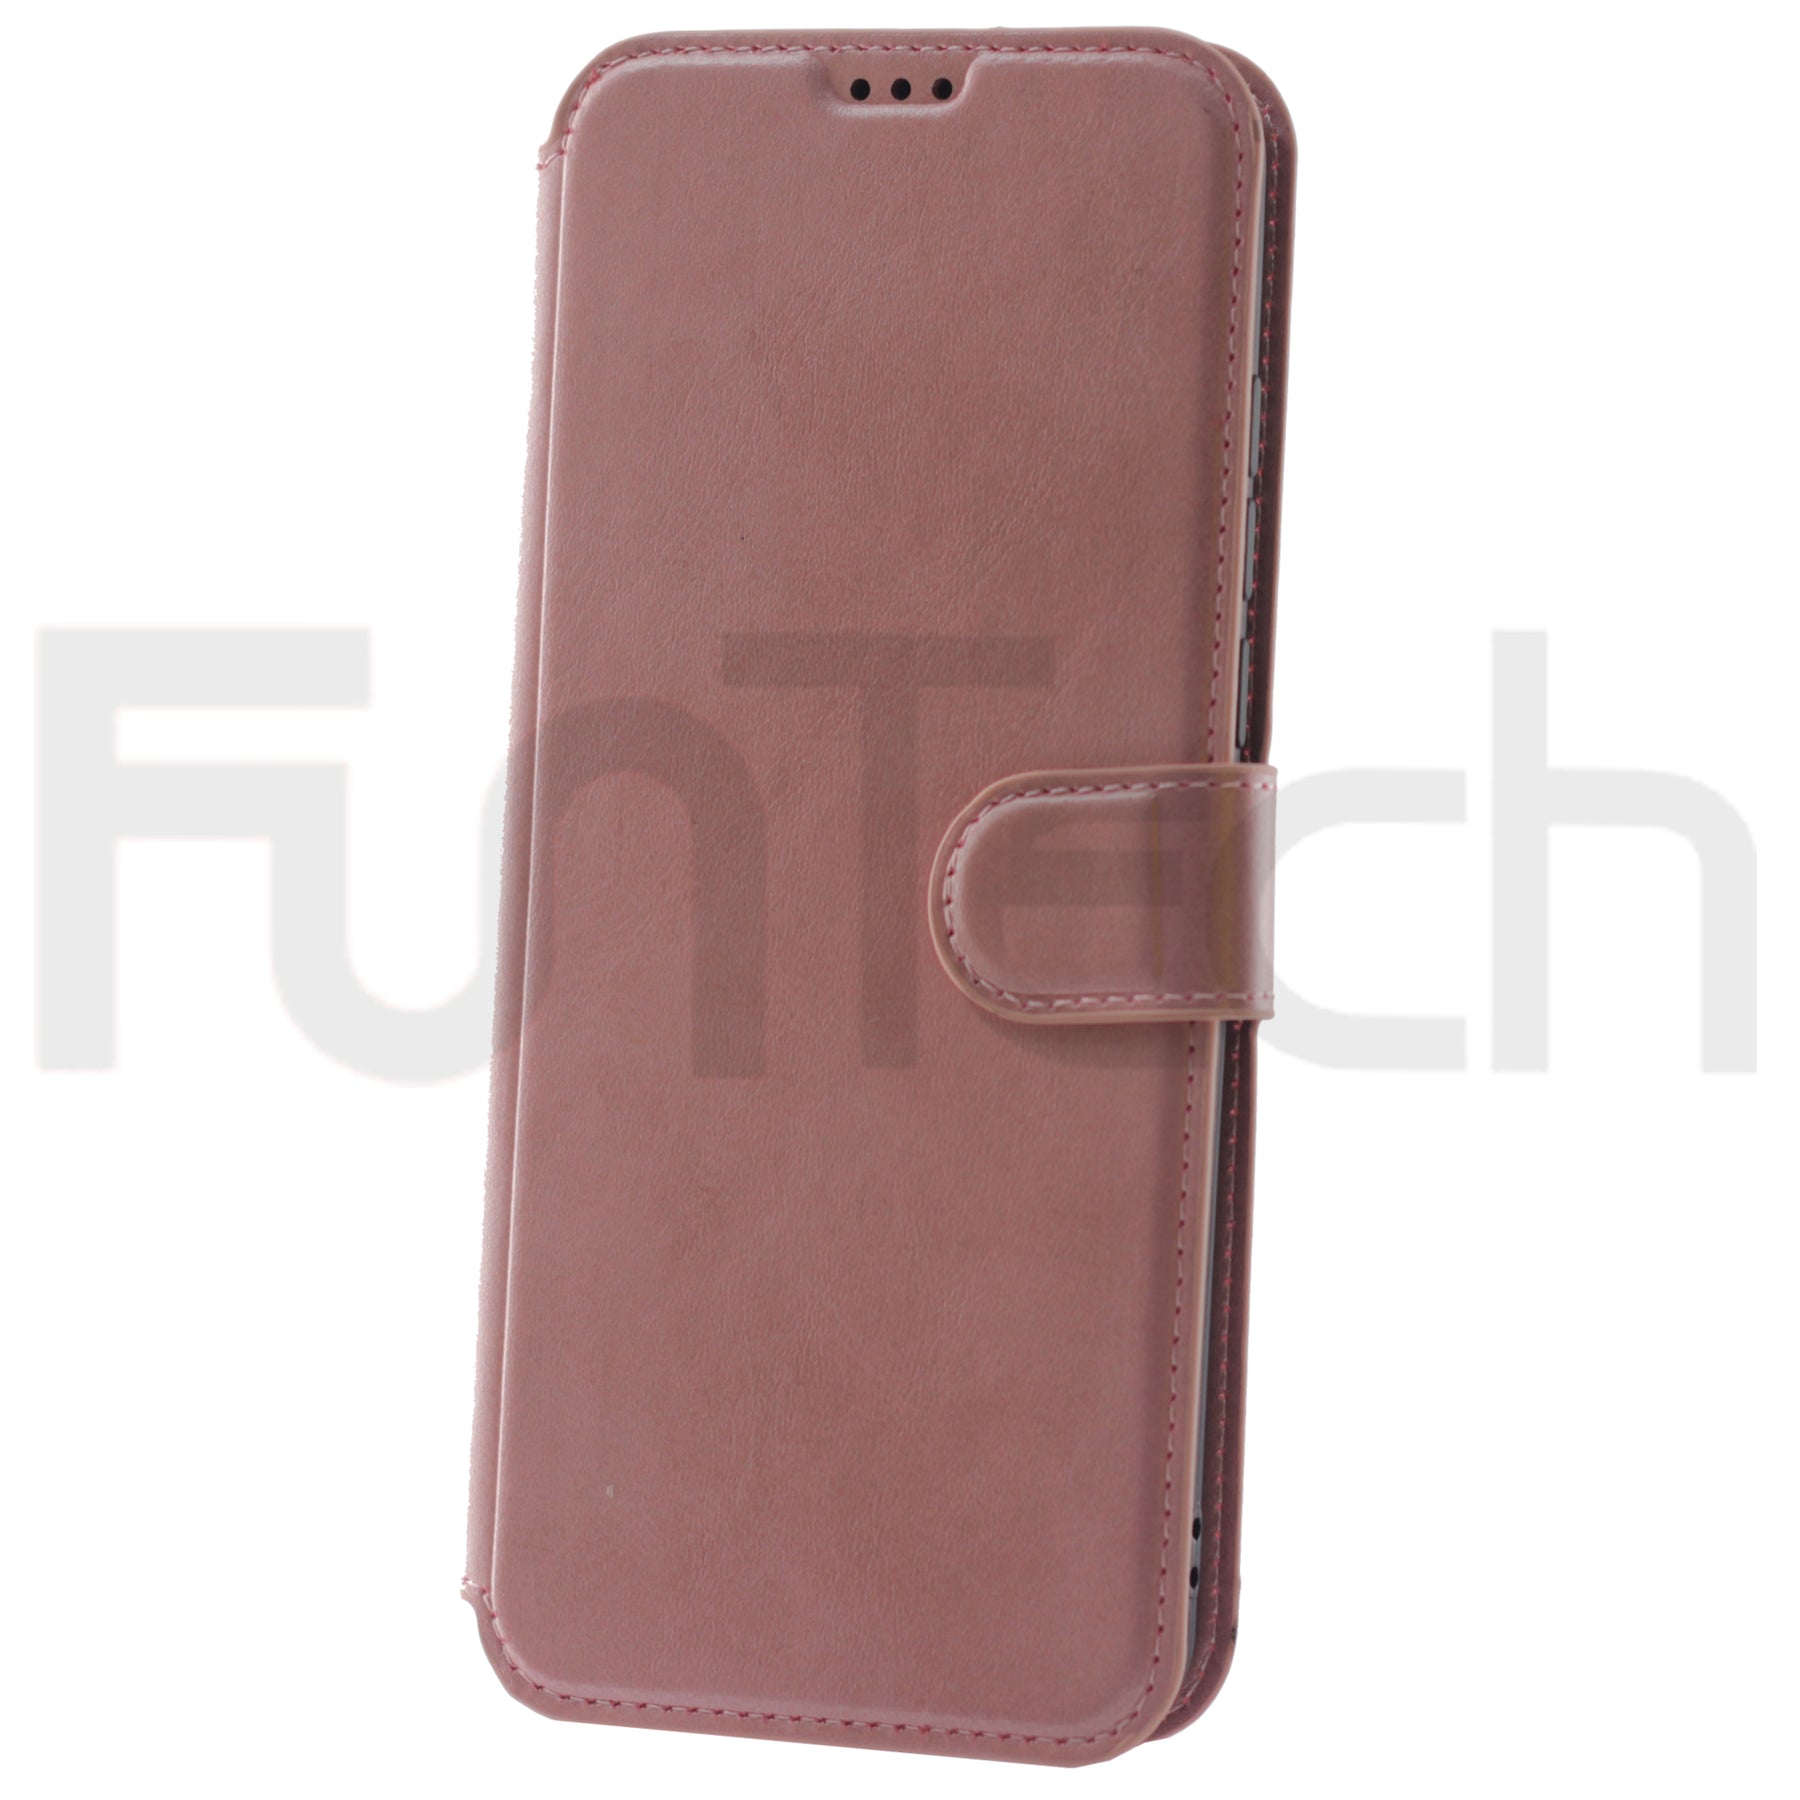 TCL, R20, Leather Wallet Case, Color Pink.